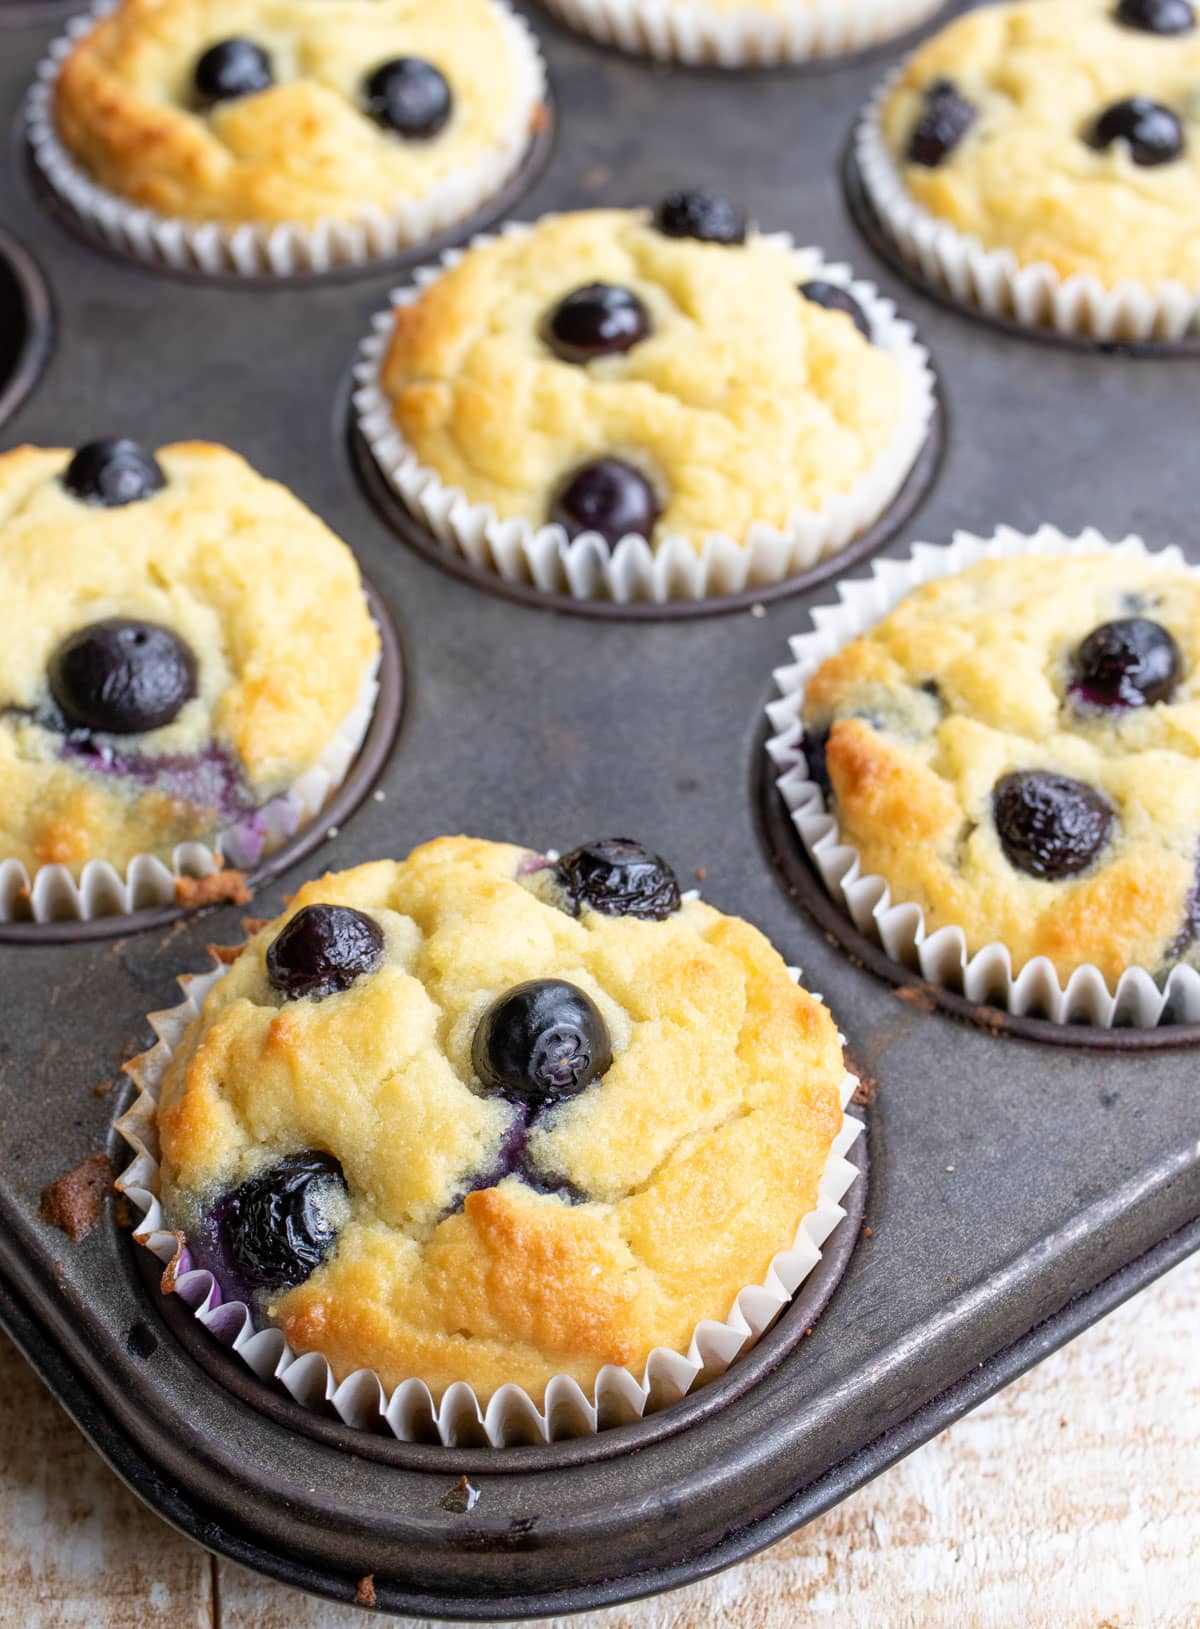 Coconut flour muffins with blueberries.